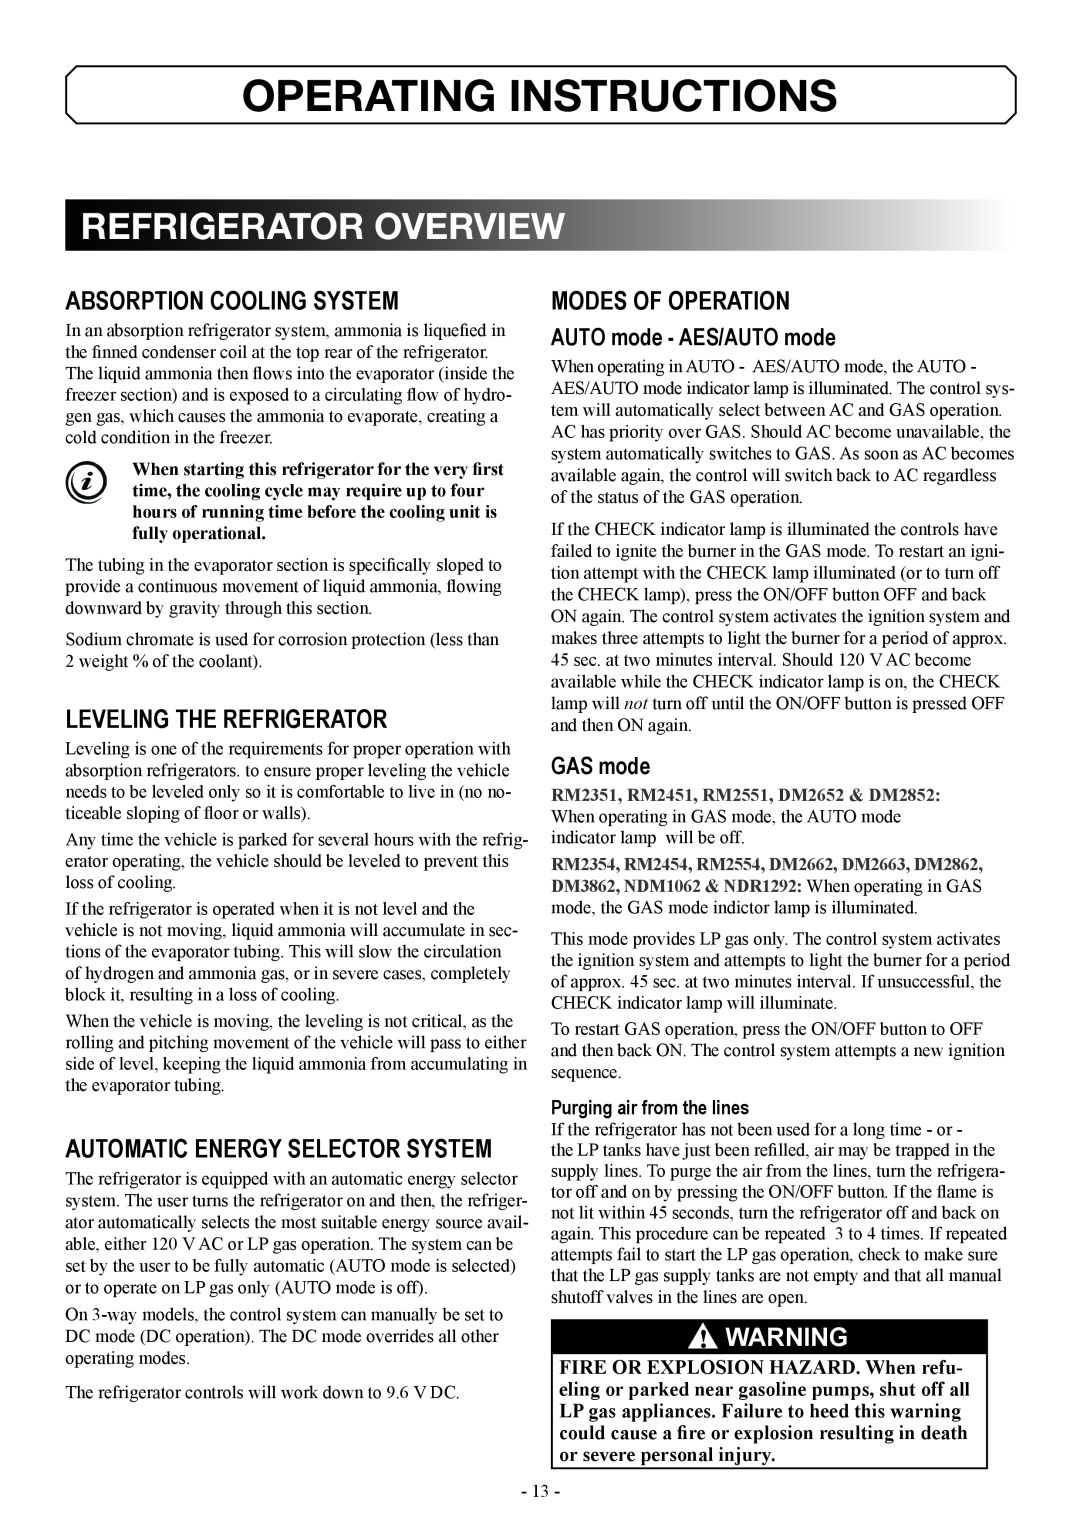 Dometic DM2862 manual operating Instructions, refrigerator overview, Absorption cooling system, Leveling the refrigerator 